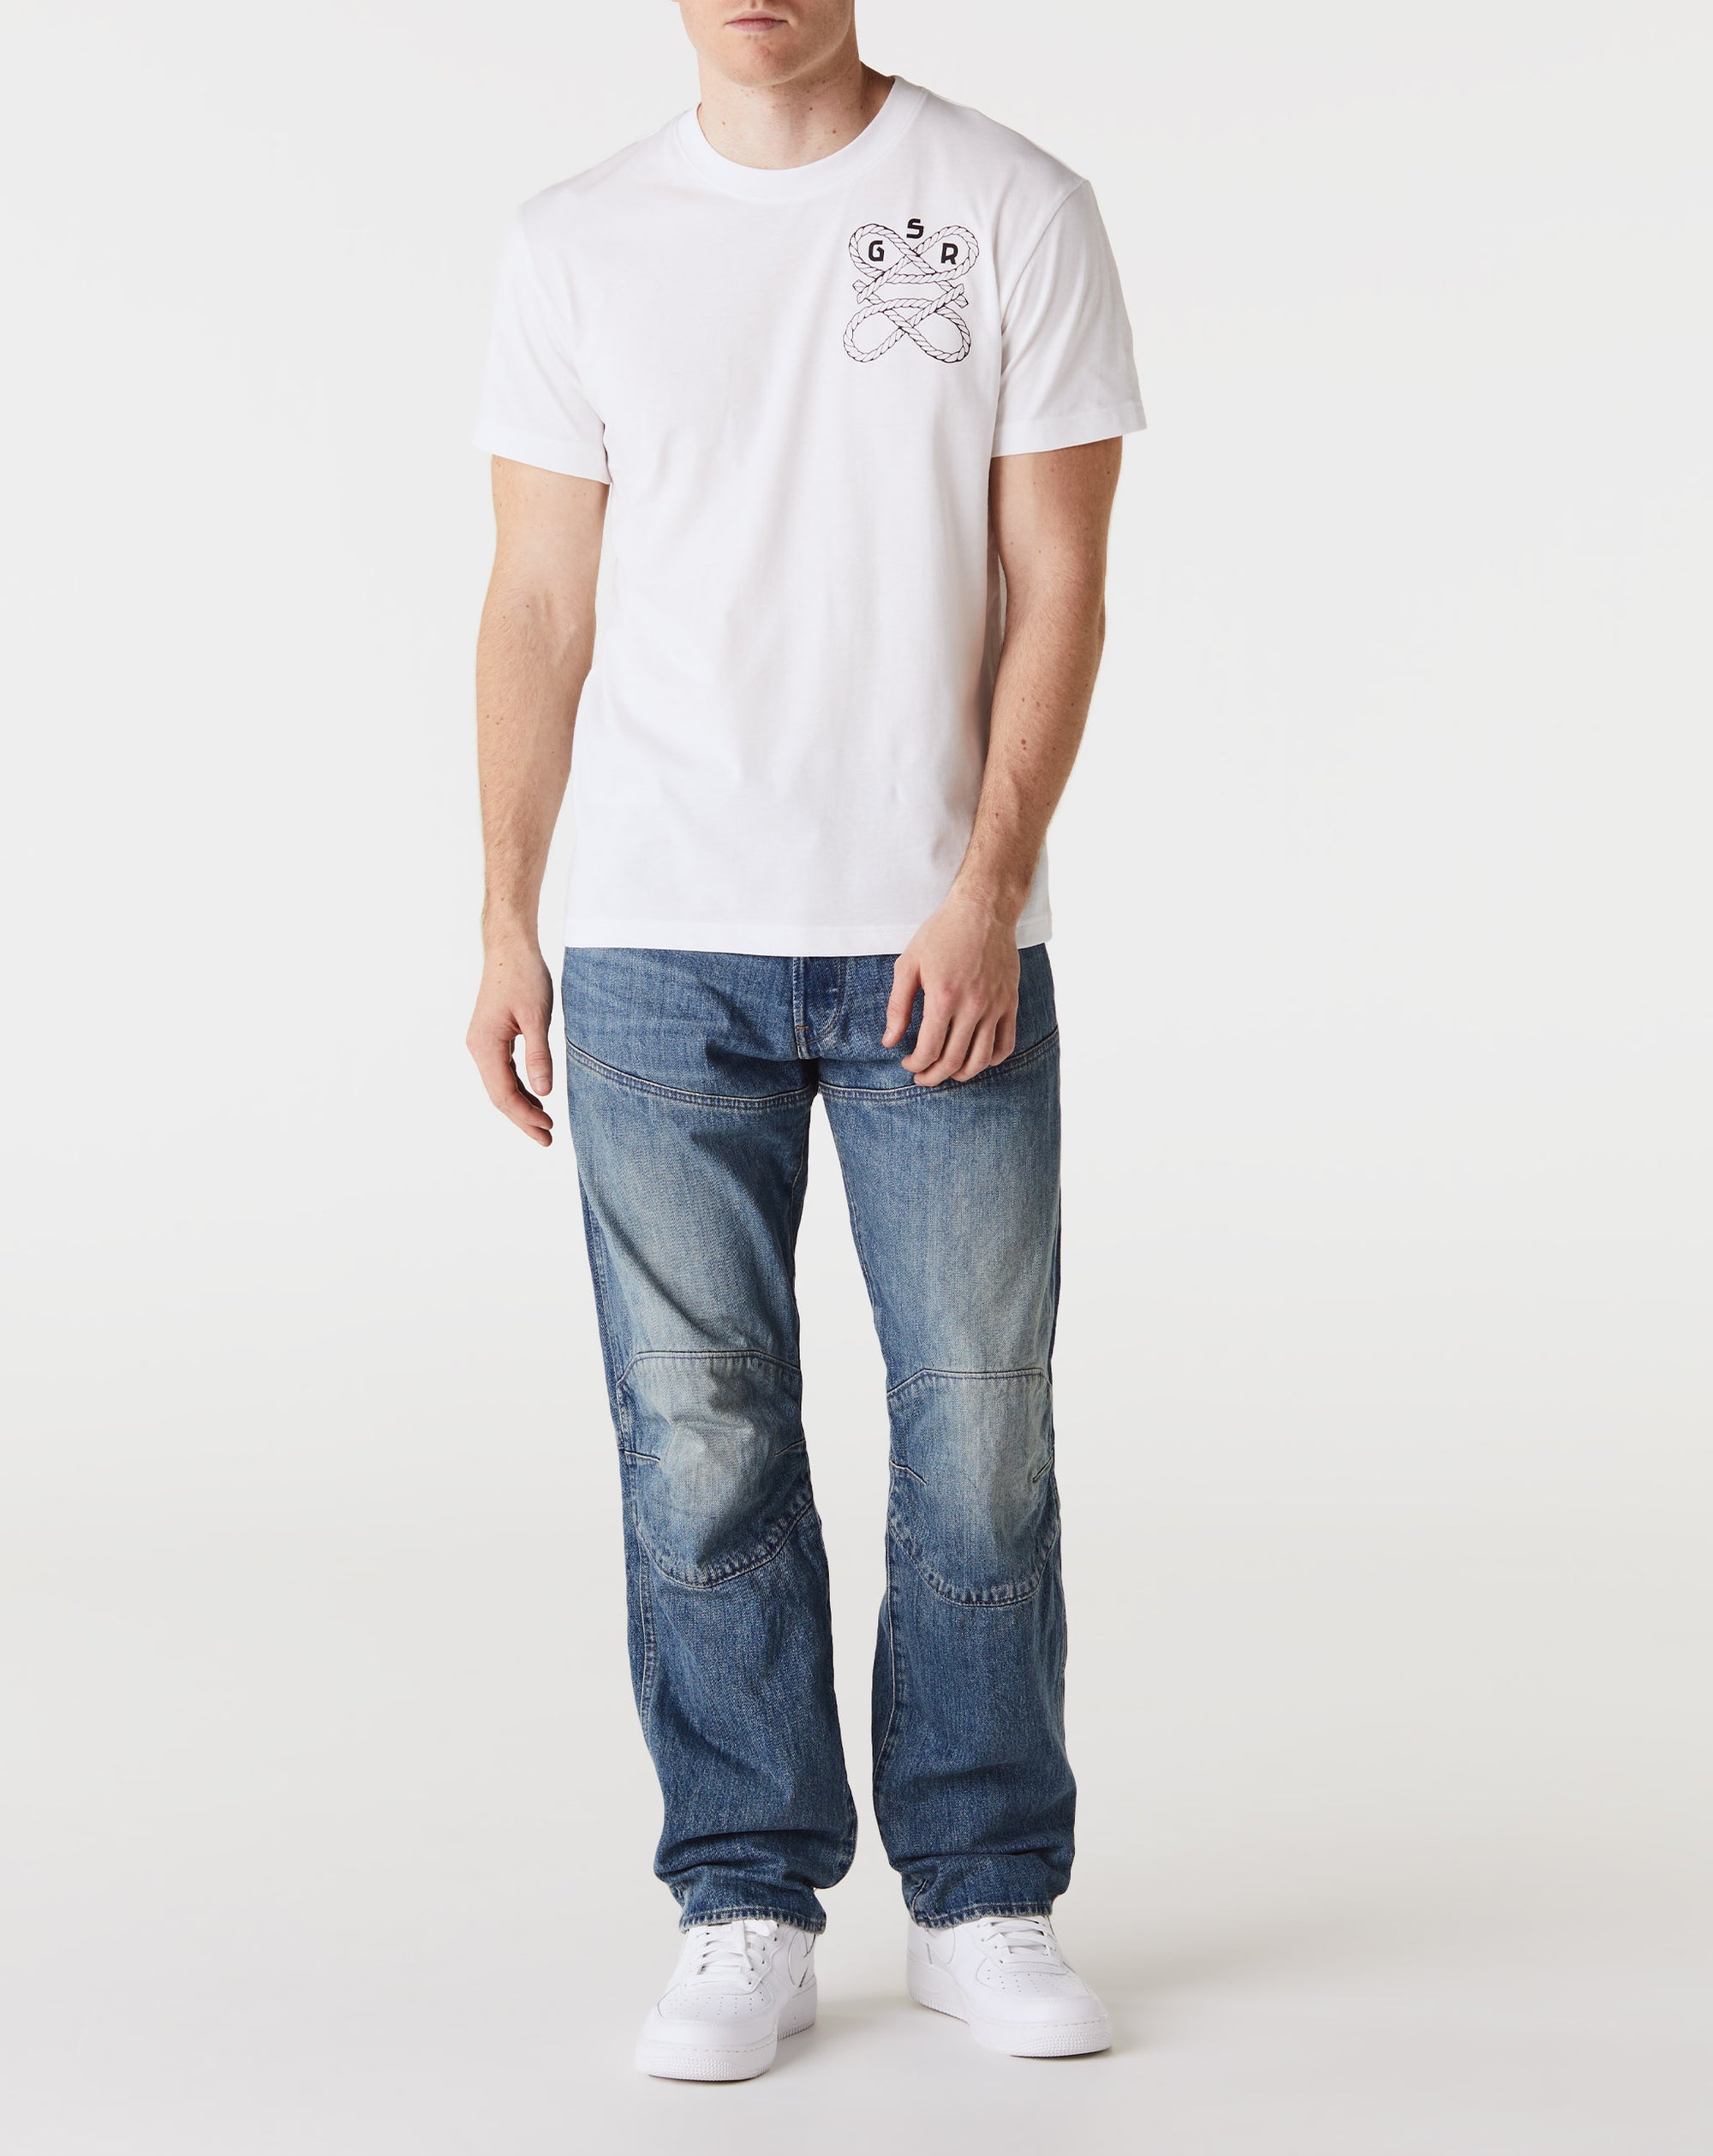 G-Star RAW Puff Print Back Graphic T-Shirt - Rule of Next Apparel